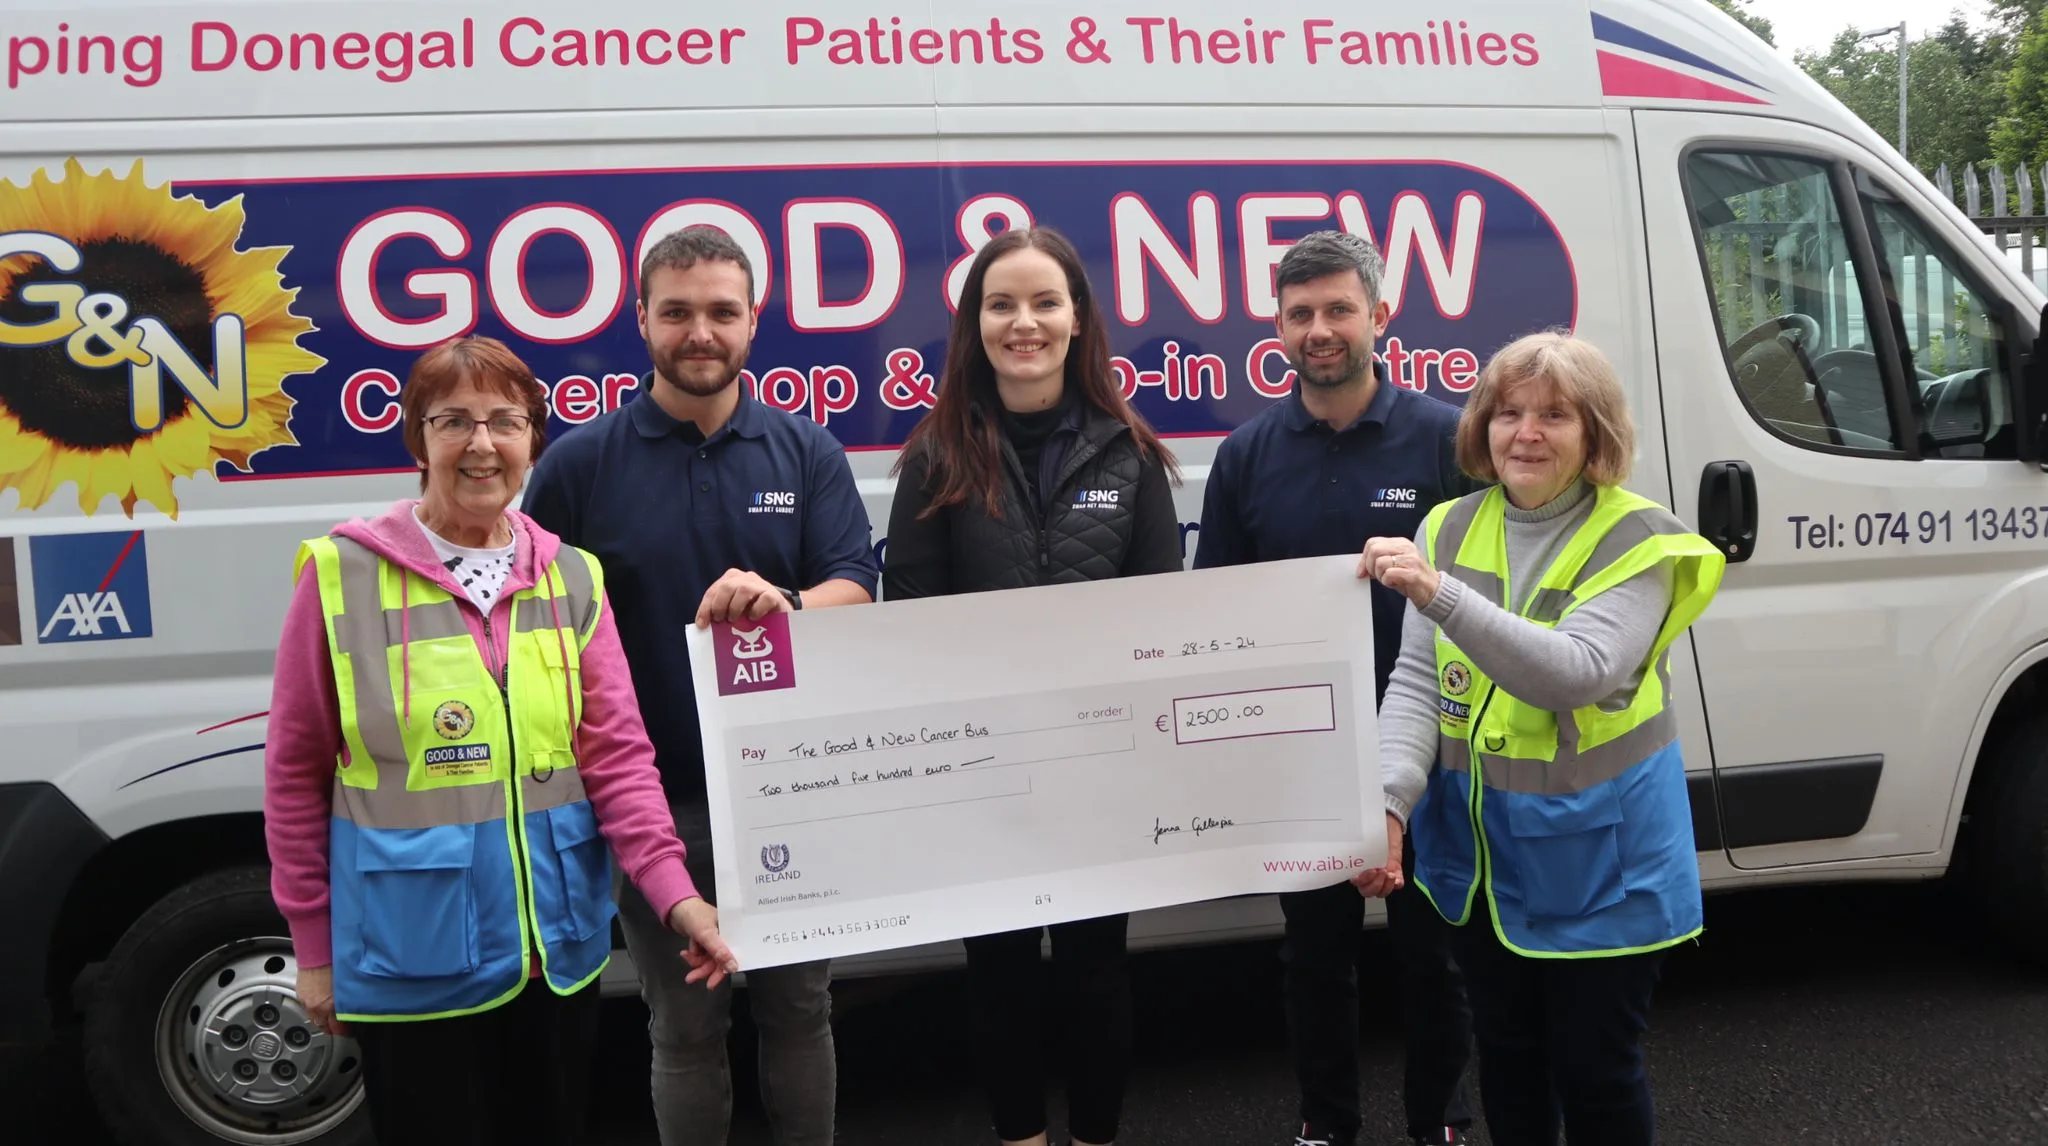 The team from SNG presenting a cheque to the good and new cancer bus in Letterkenny